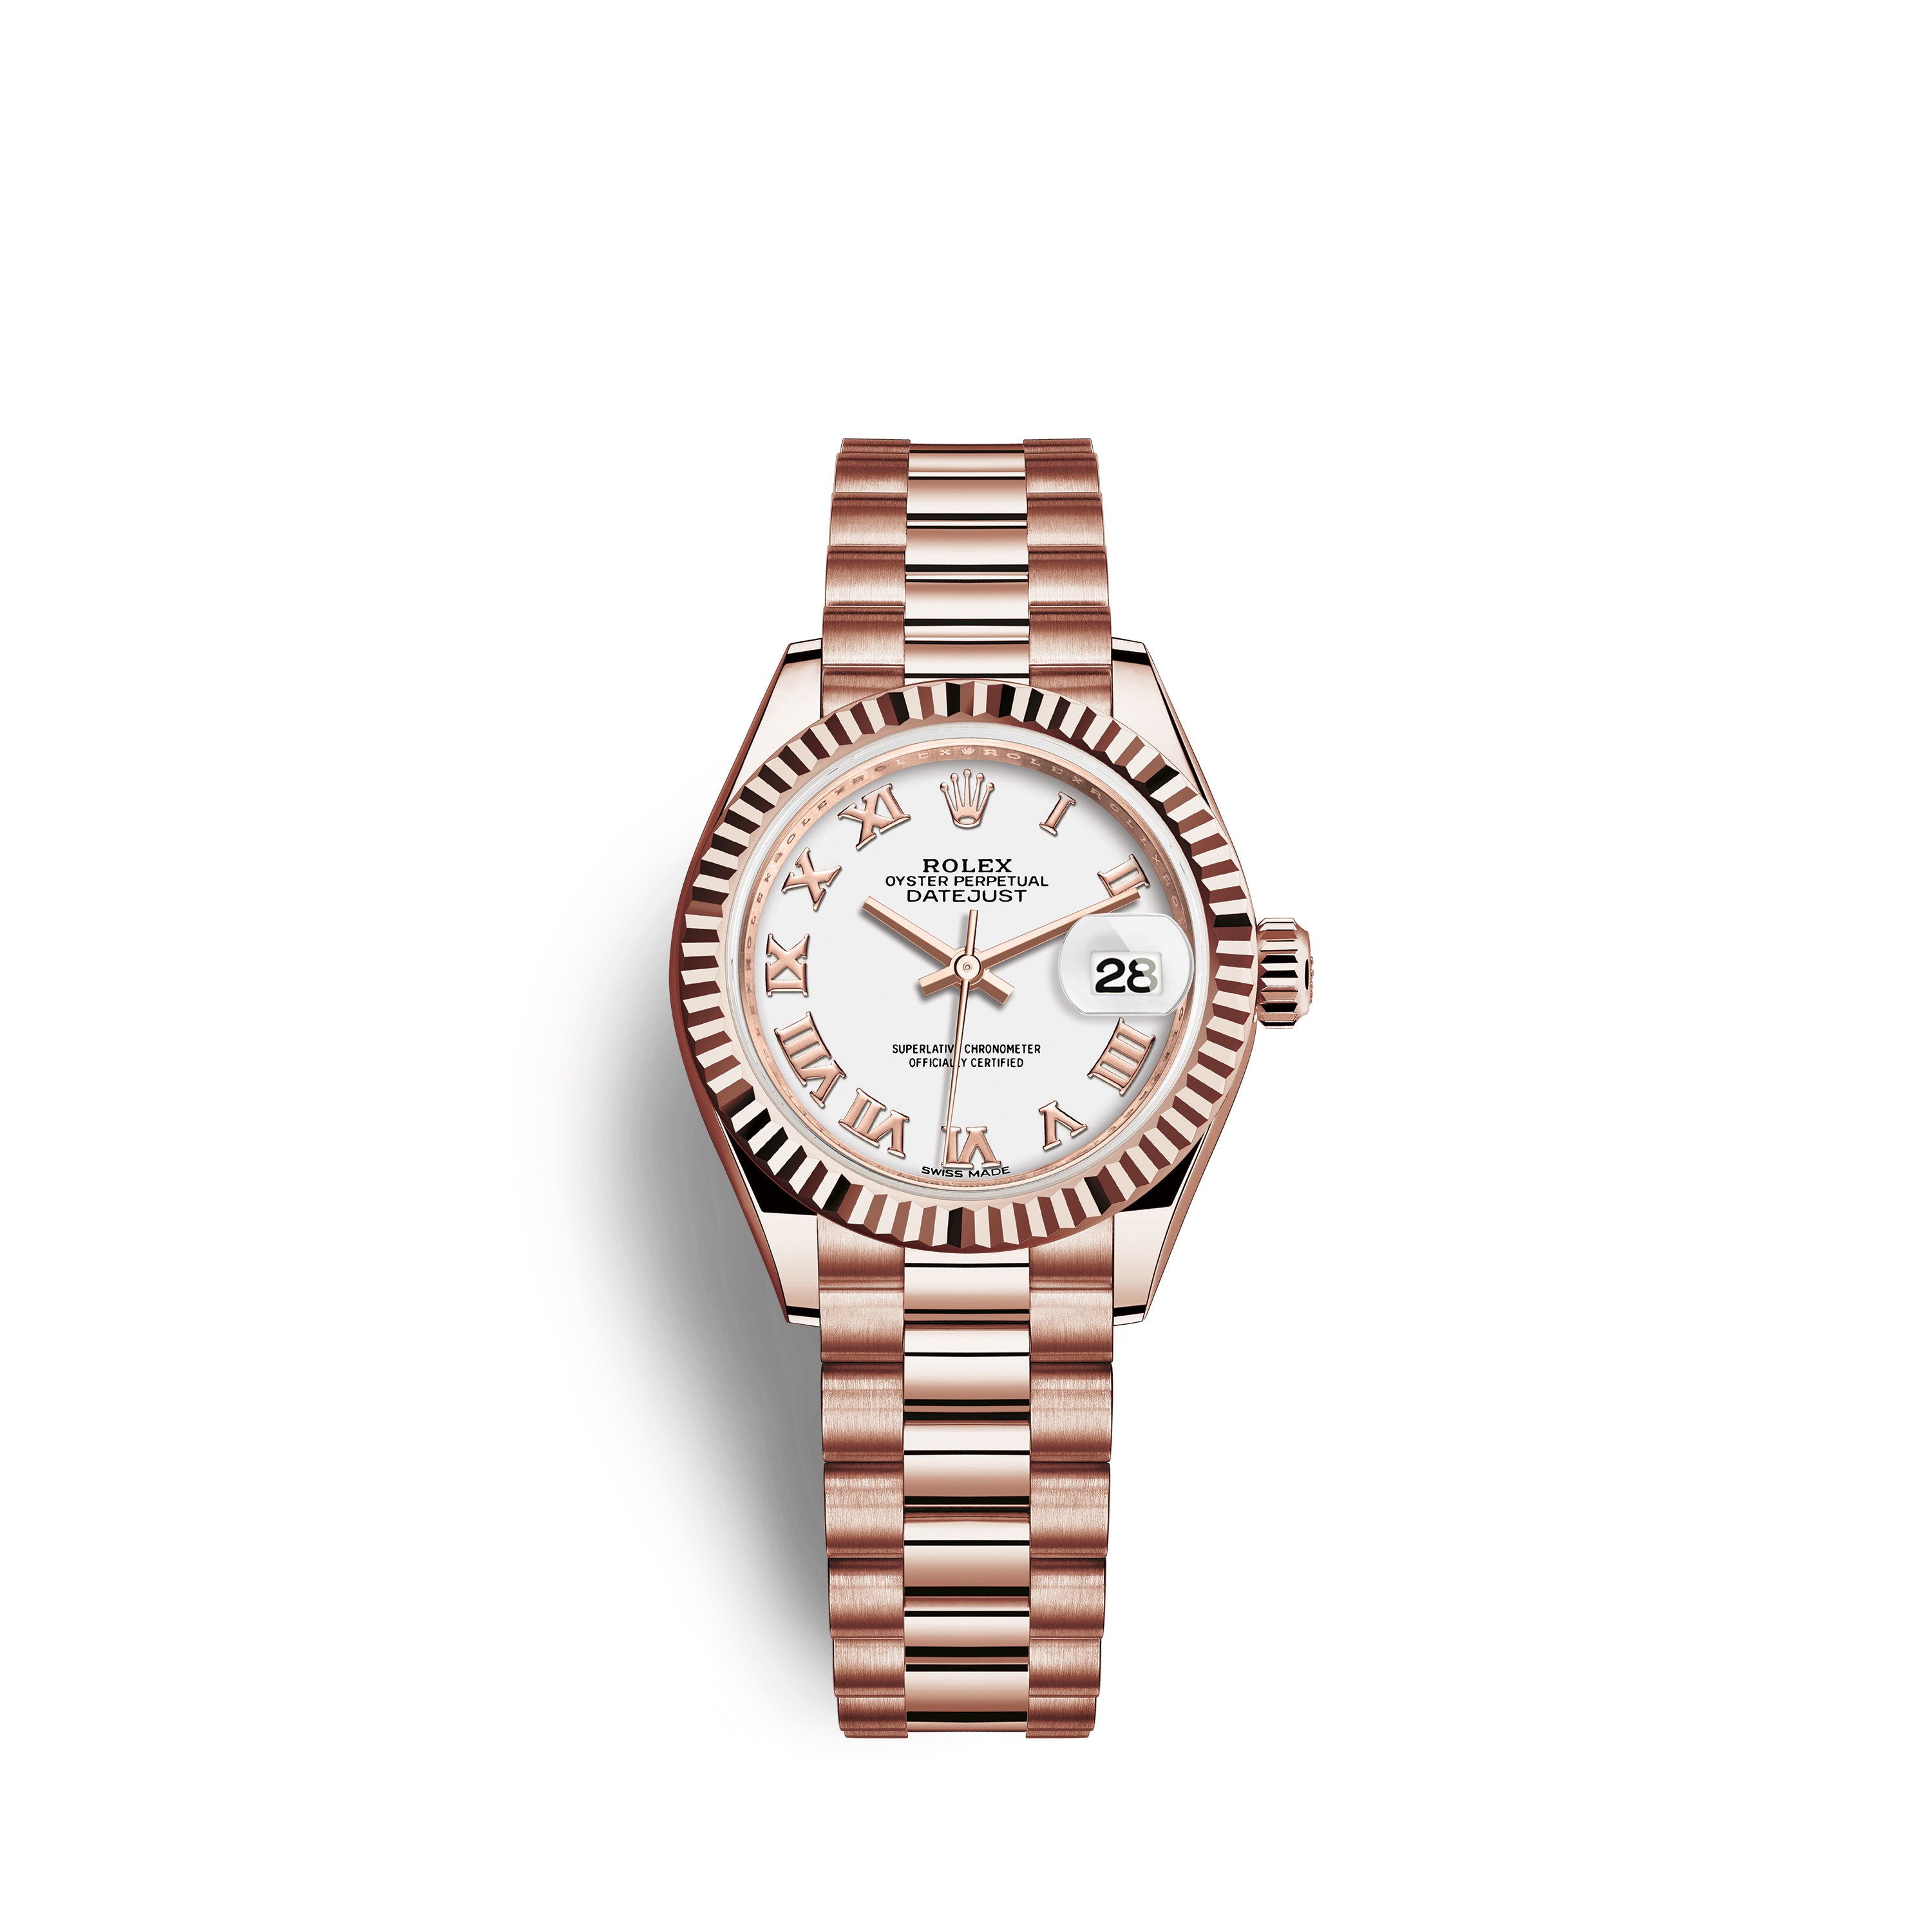 Lady-Datejust 28 279175 Rose Gold Watch (White) - Click Image to Close